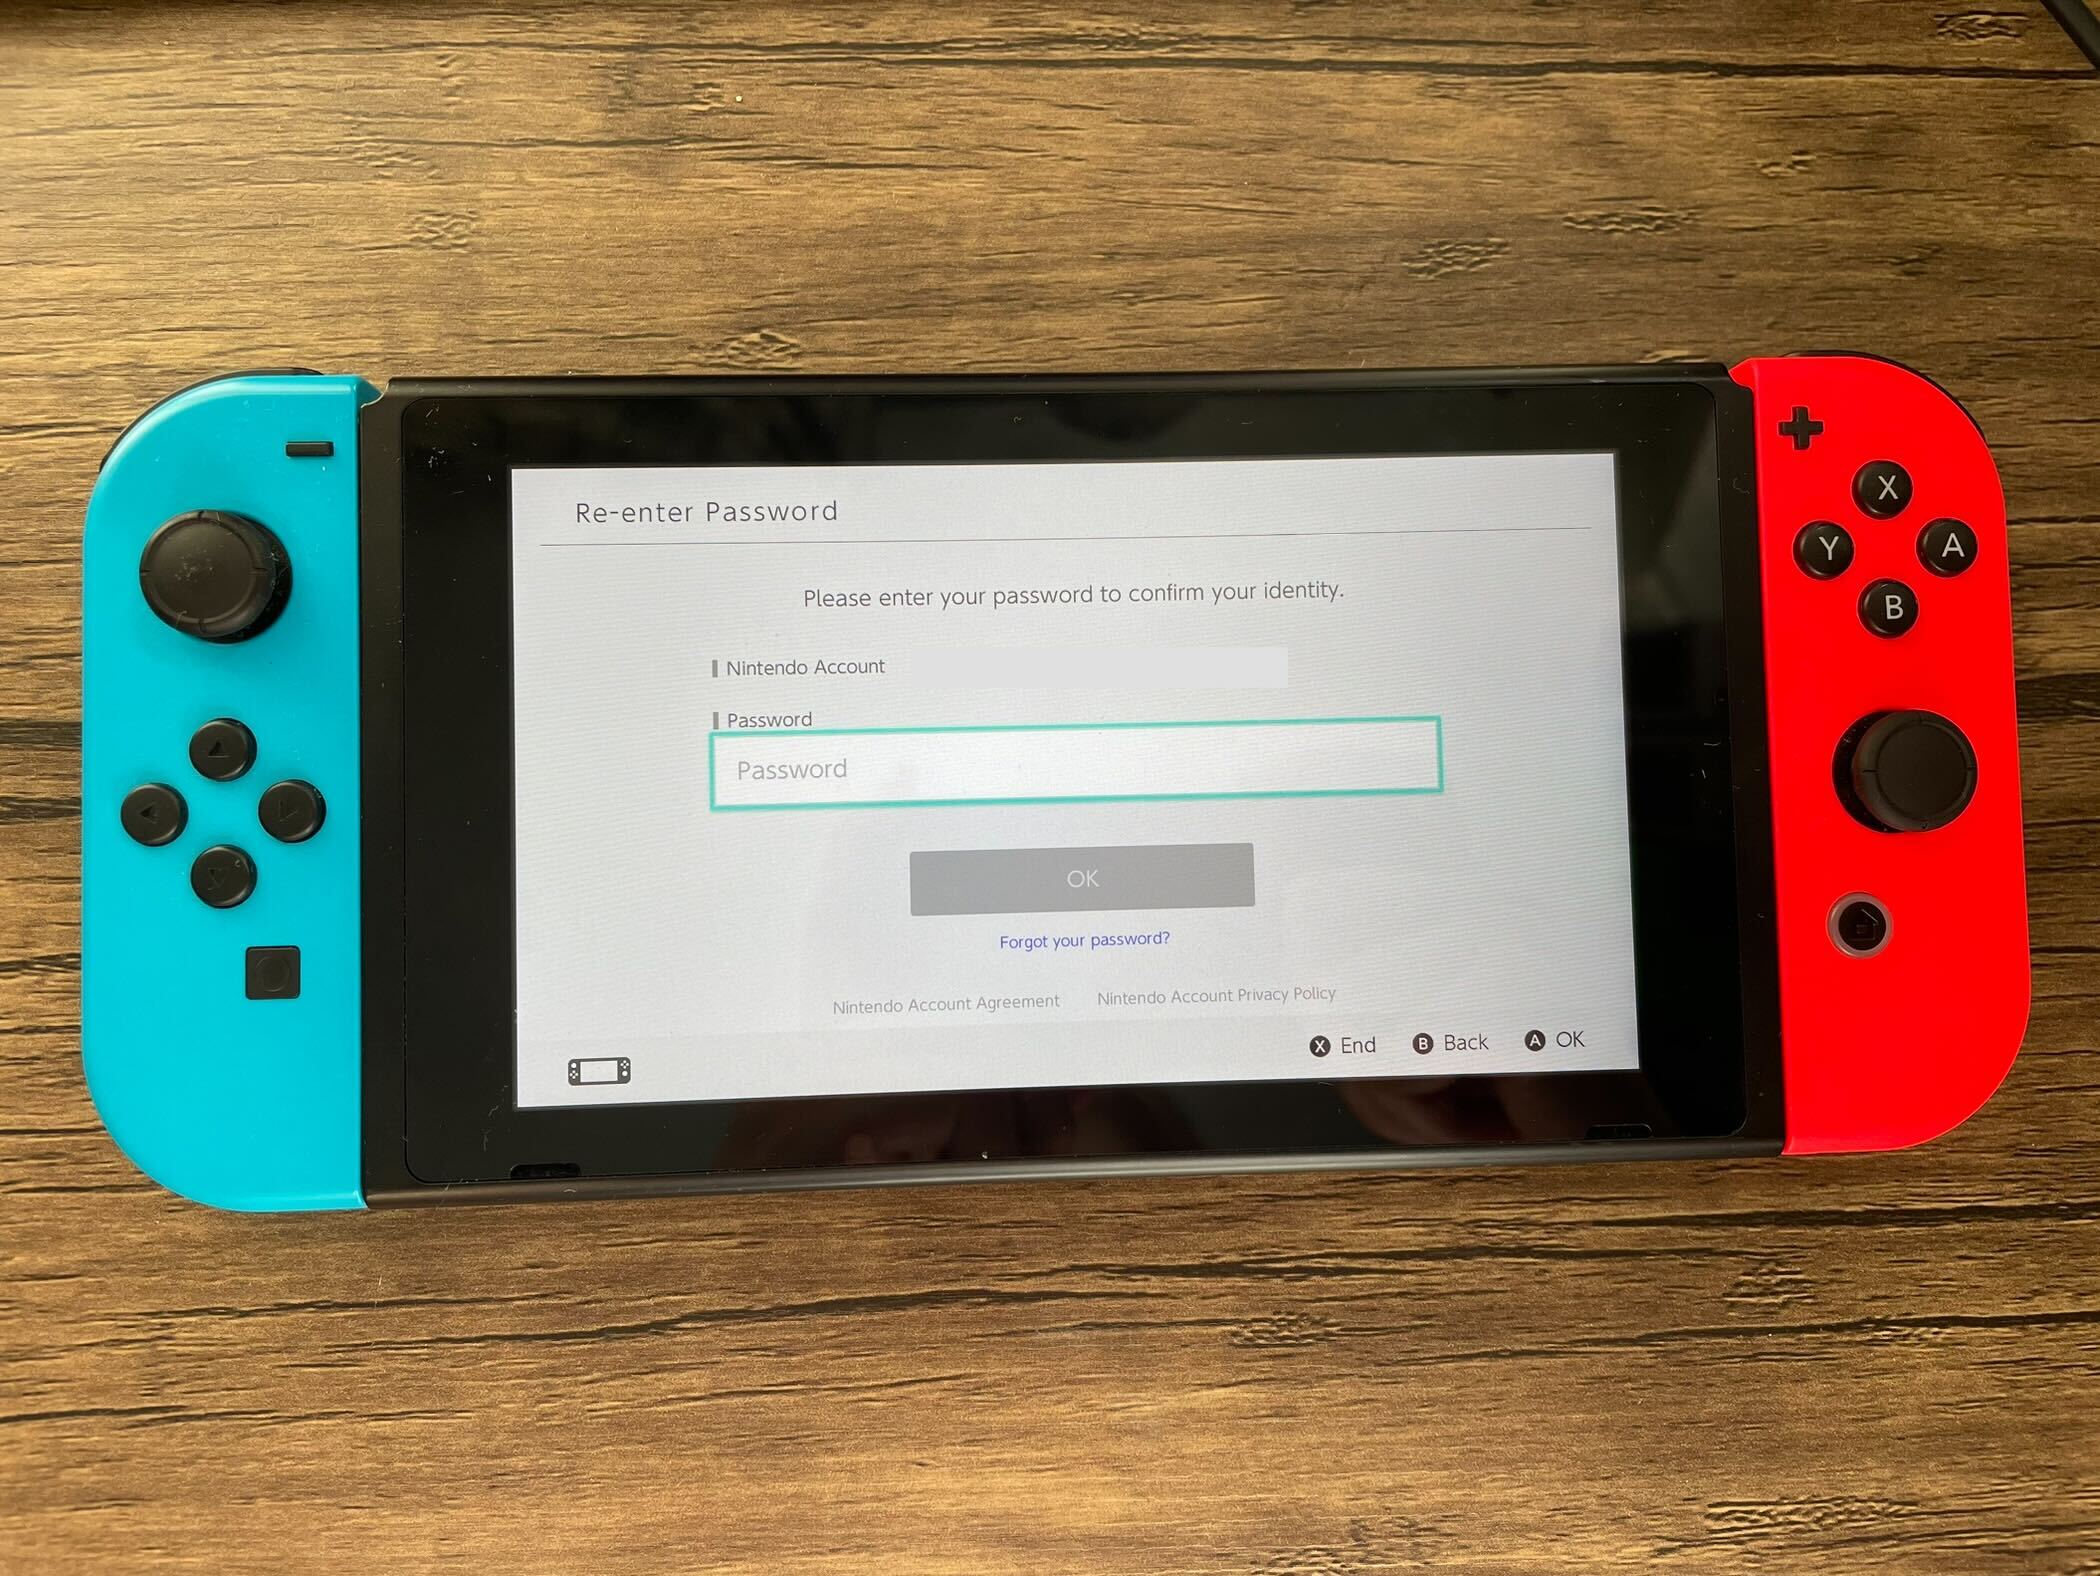 Enter your password on Switch